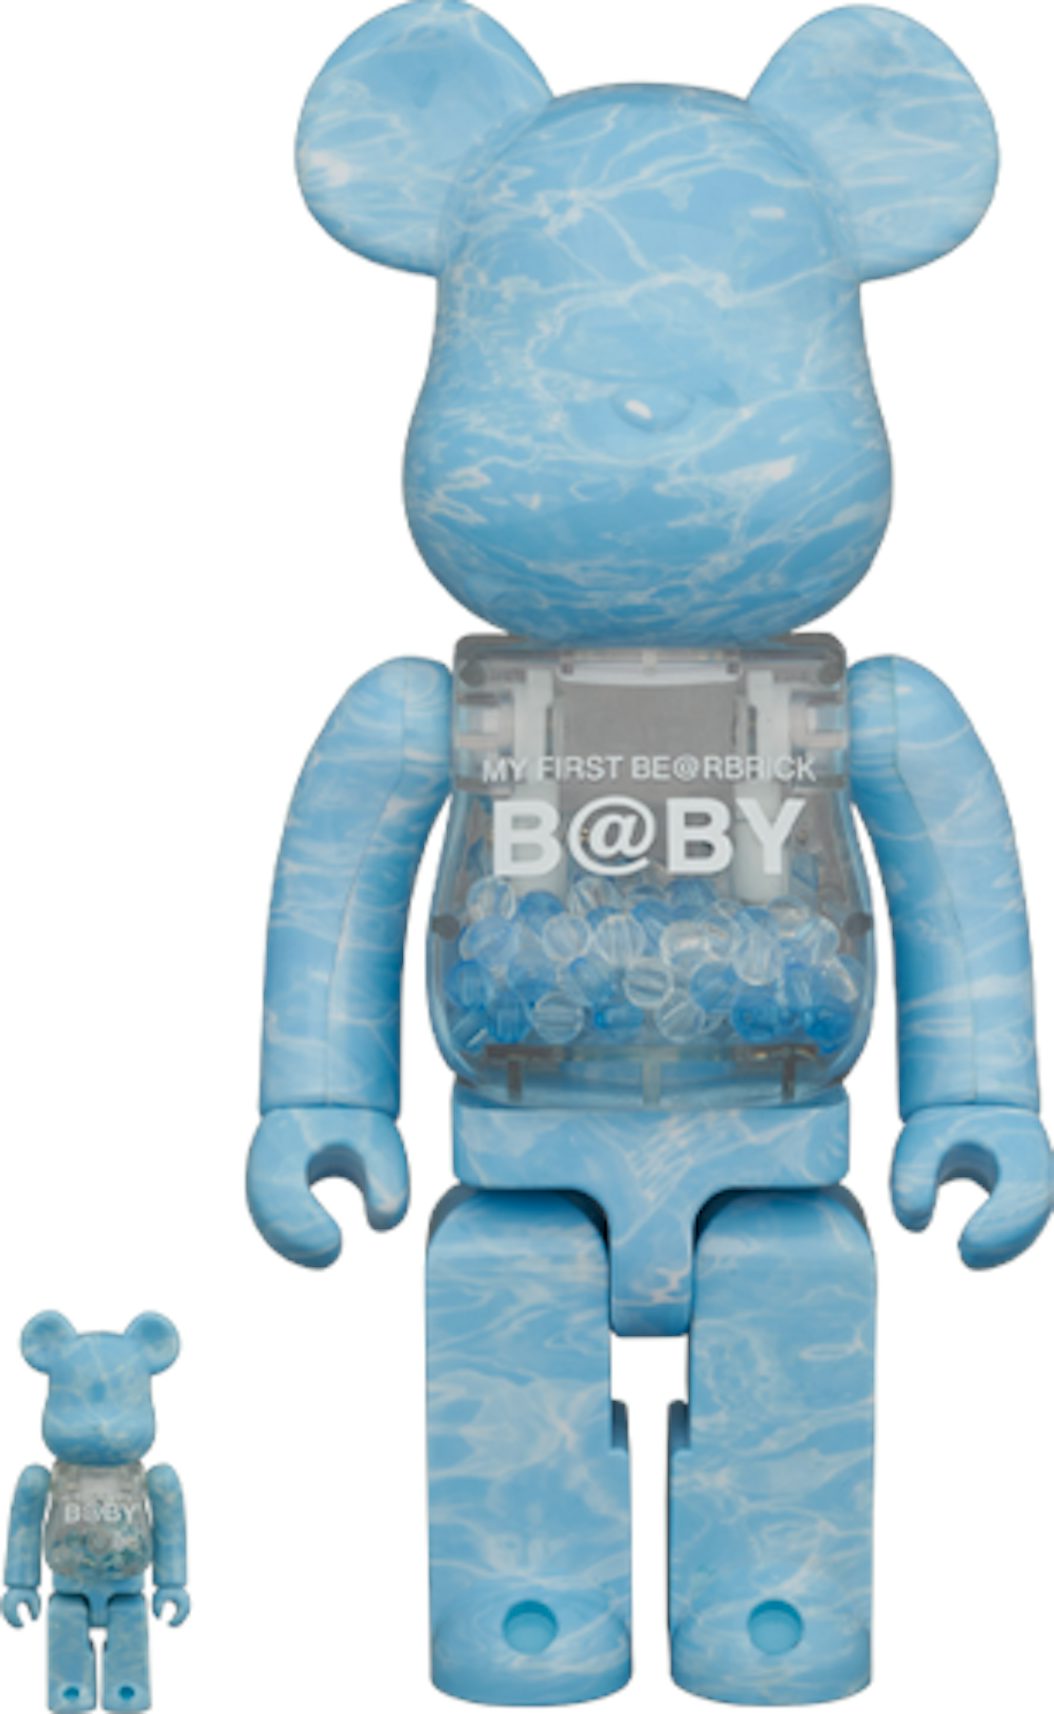 MY FIRST BE@RBRICK B@BY WATER CREST 400% | www ...